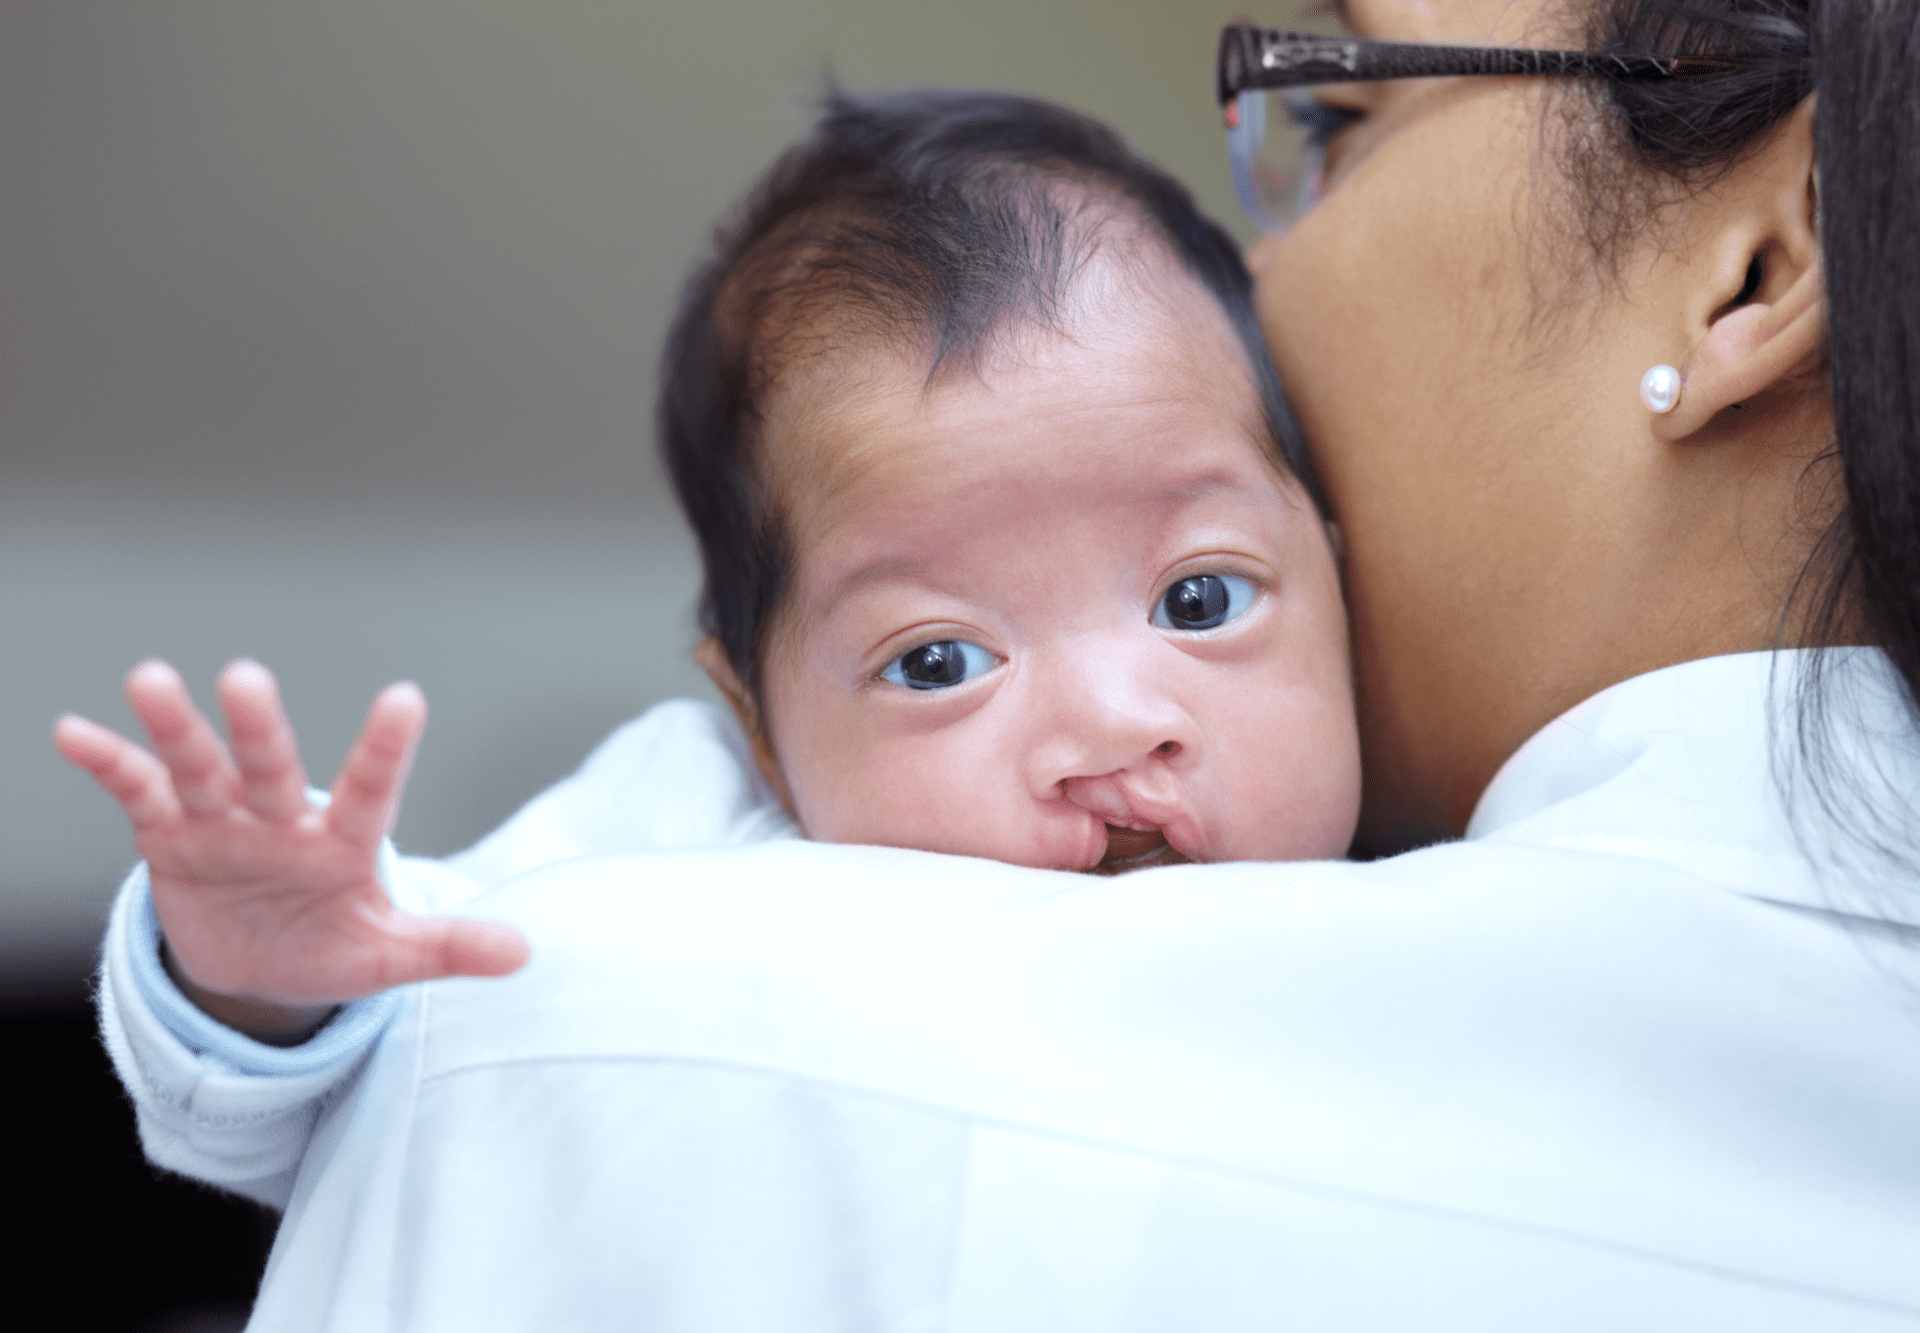 An infant with a cleft lip looks over the shoulder of a woman.